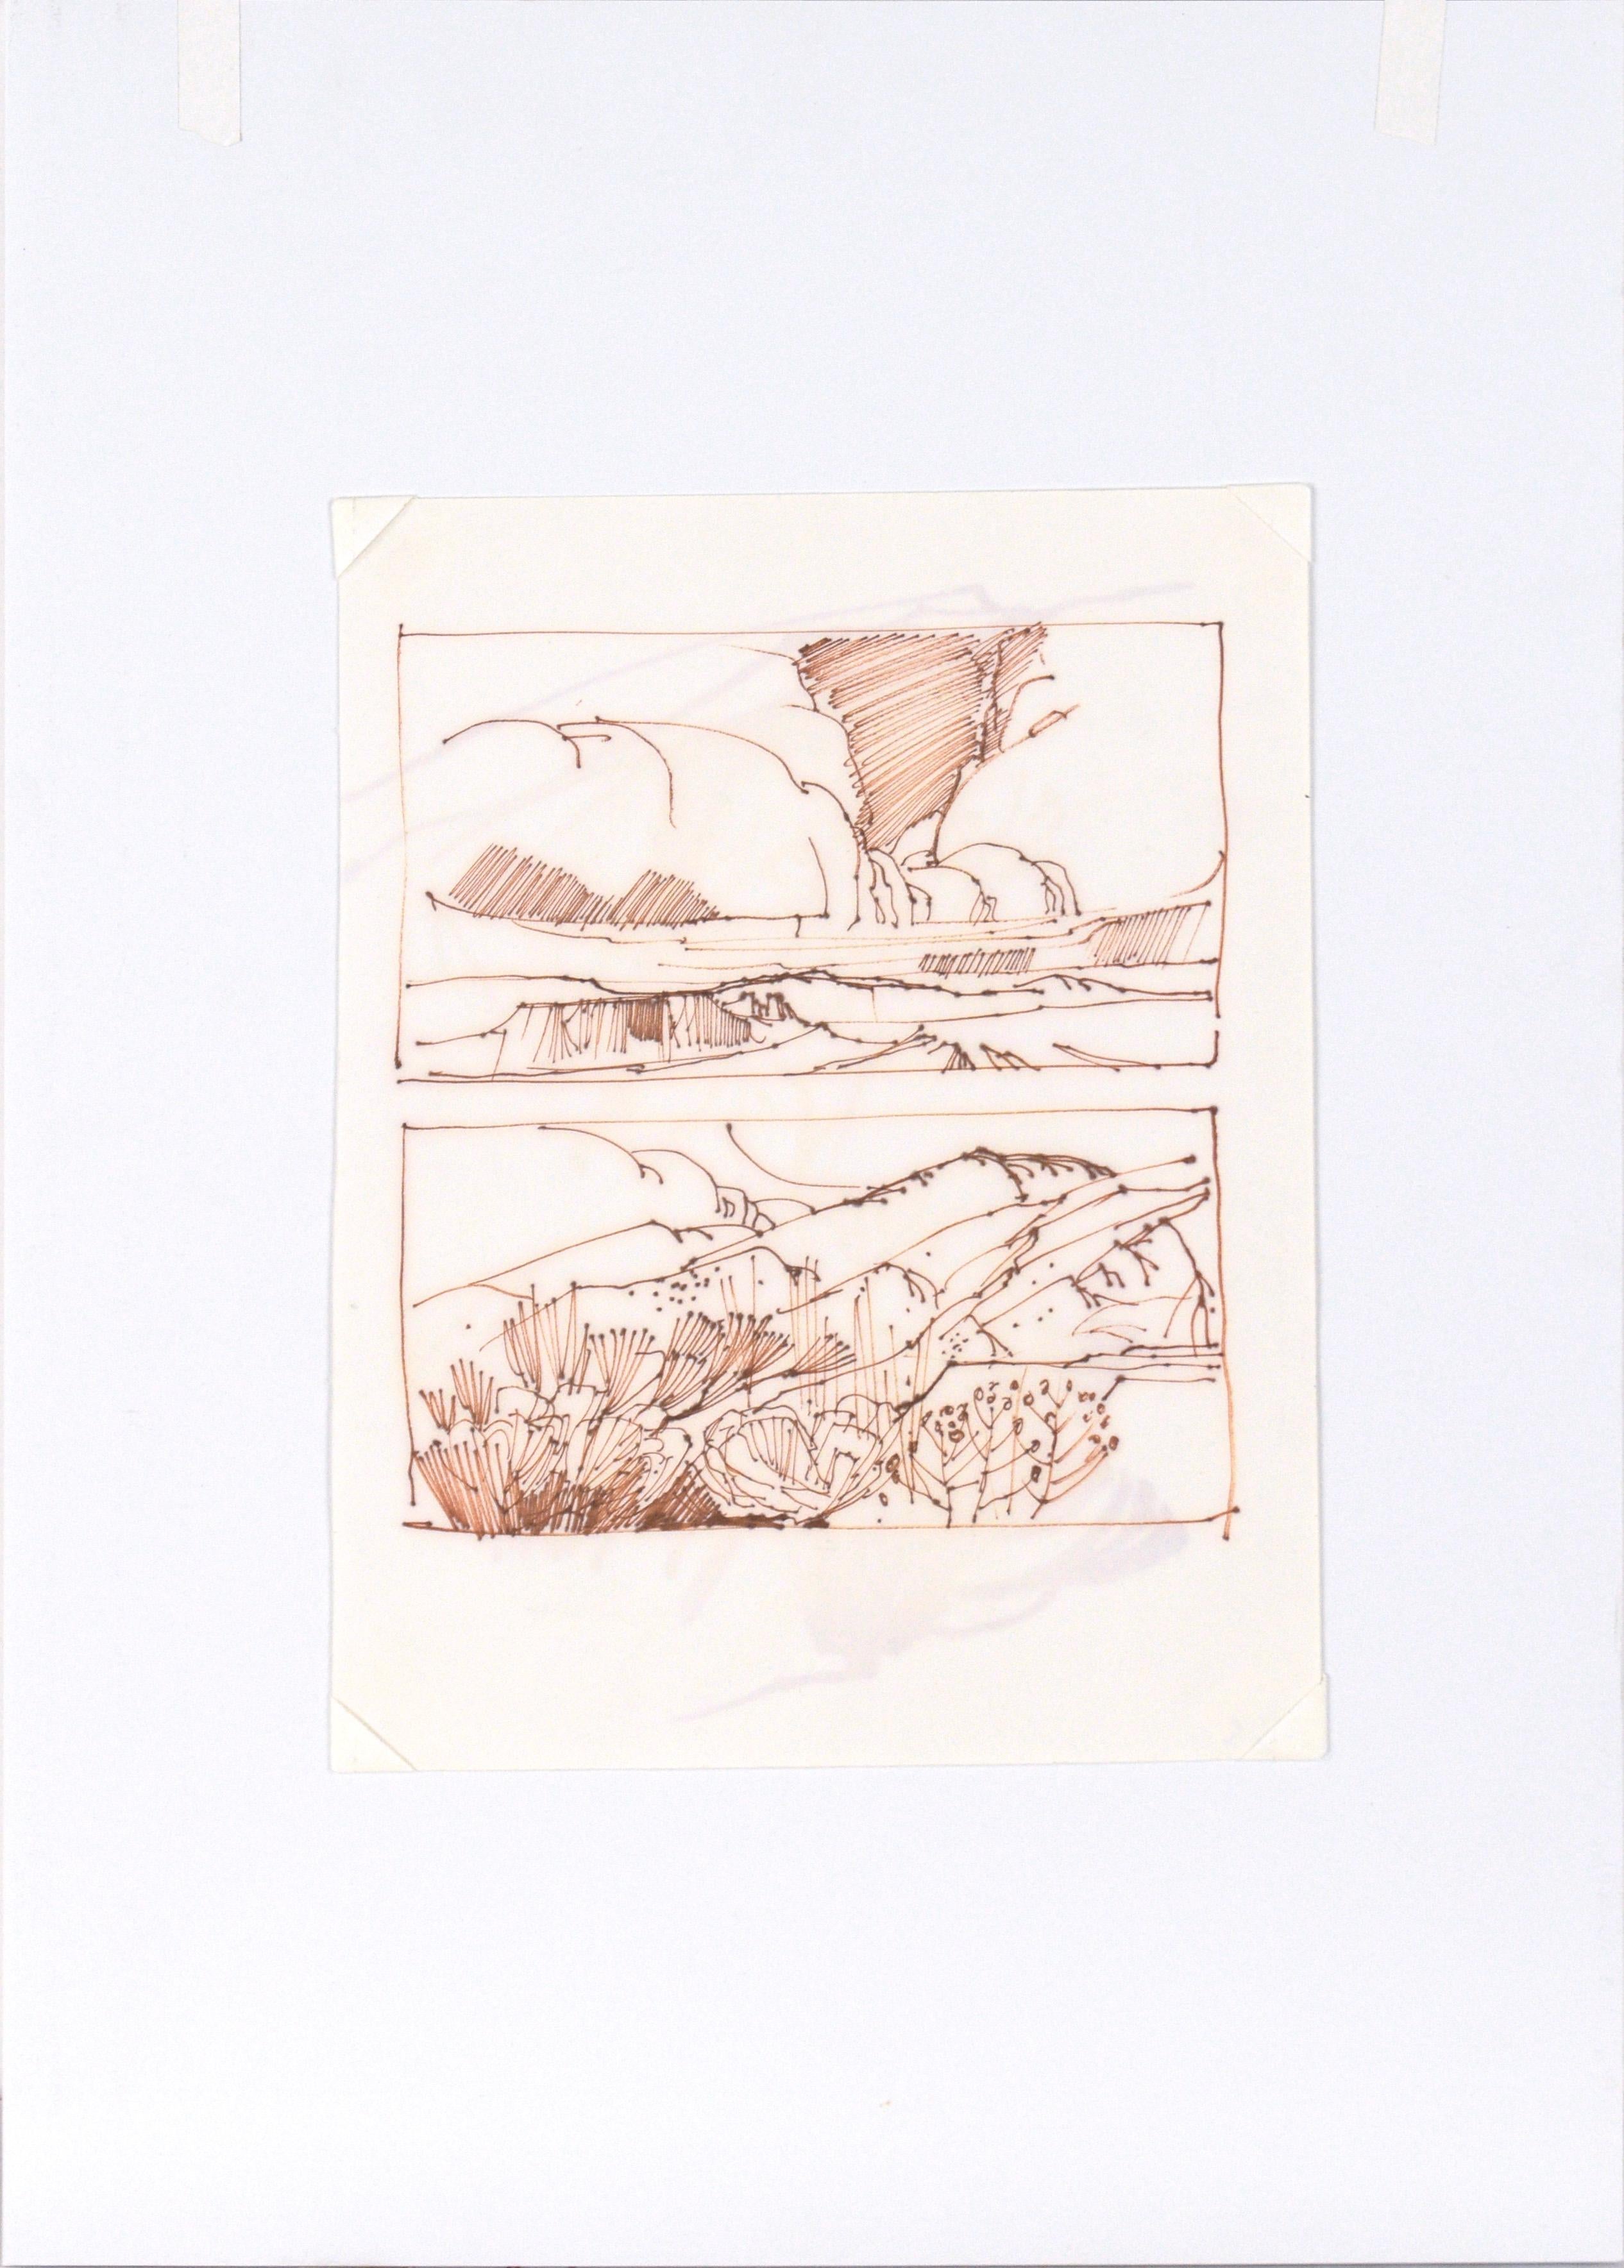 Two High Desert Landscapes - Line Drawing in Sepia-Toned Ink on Paper For Sale 1